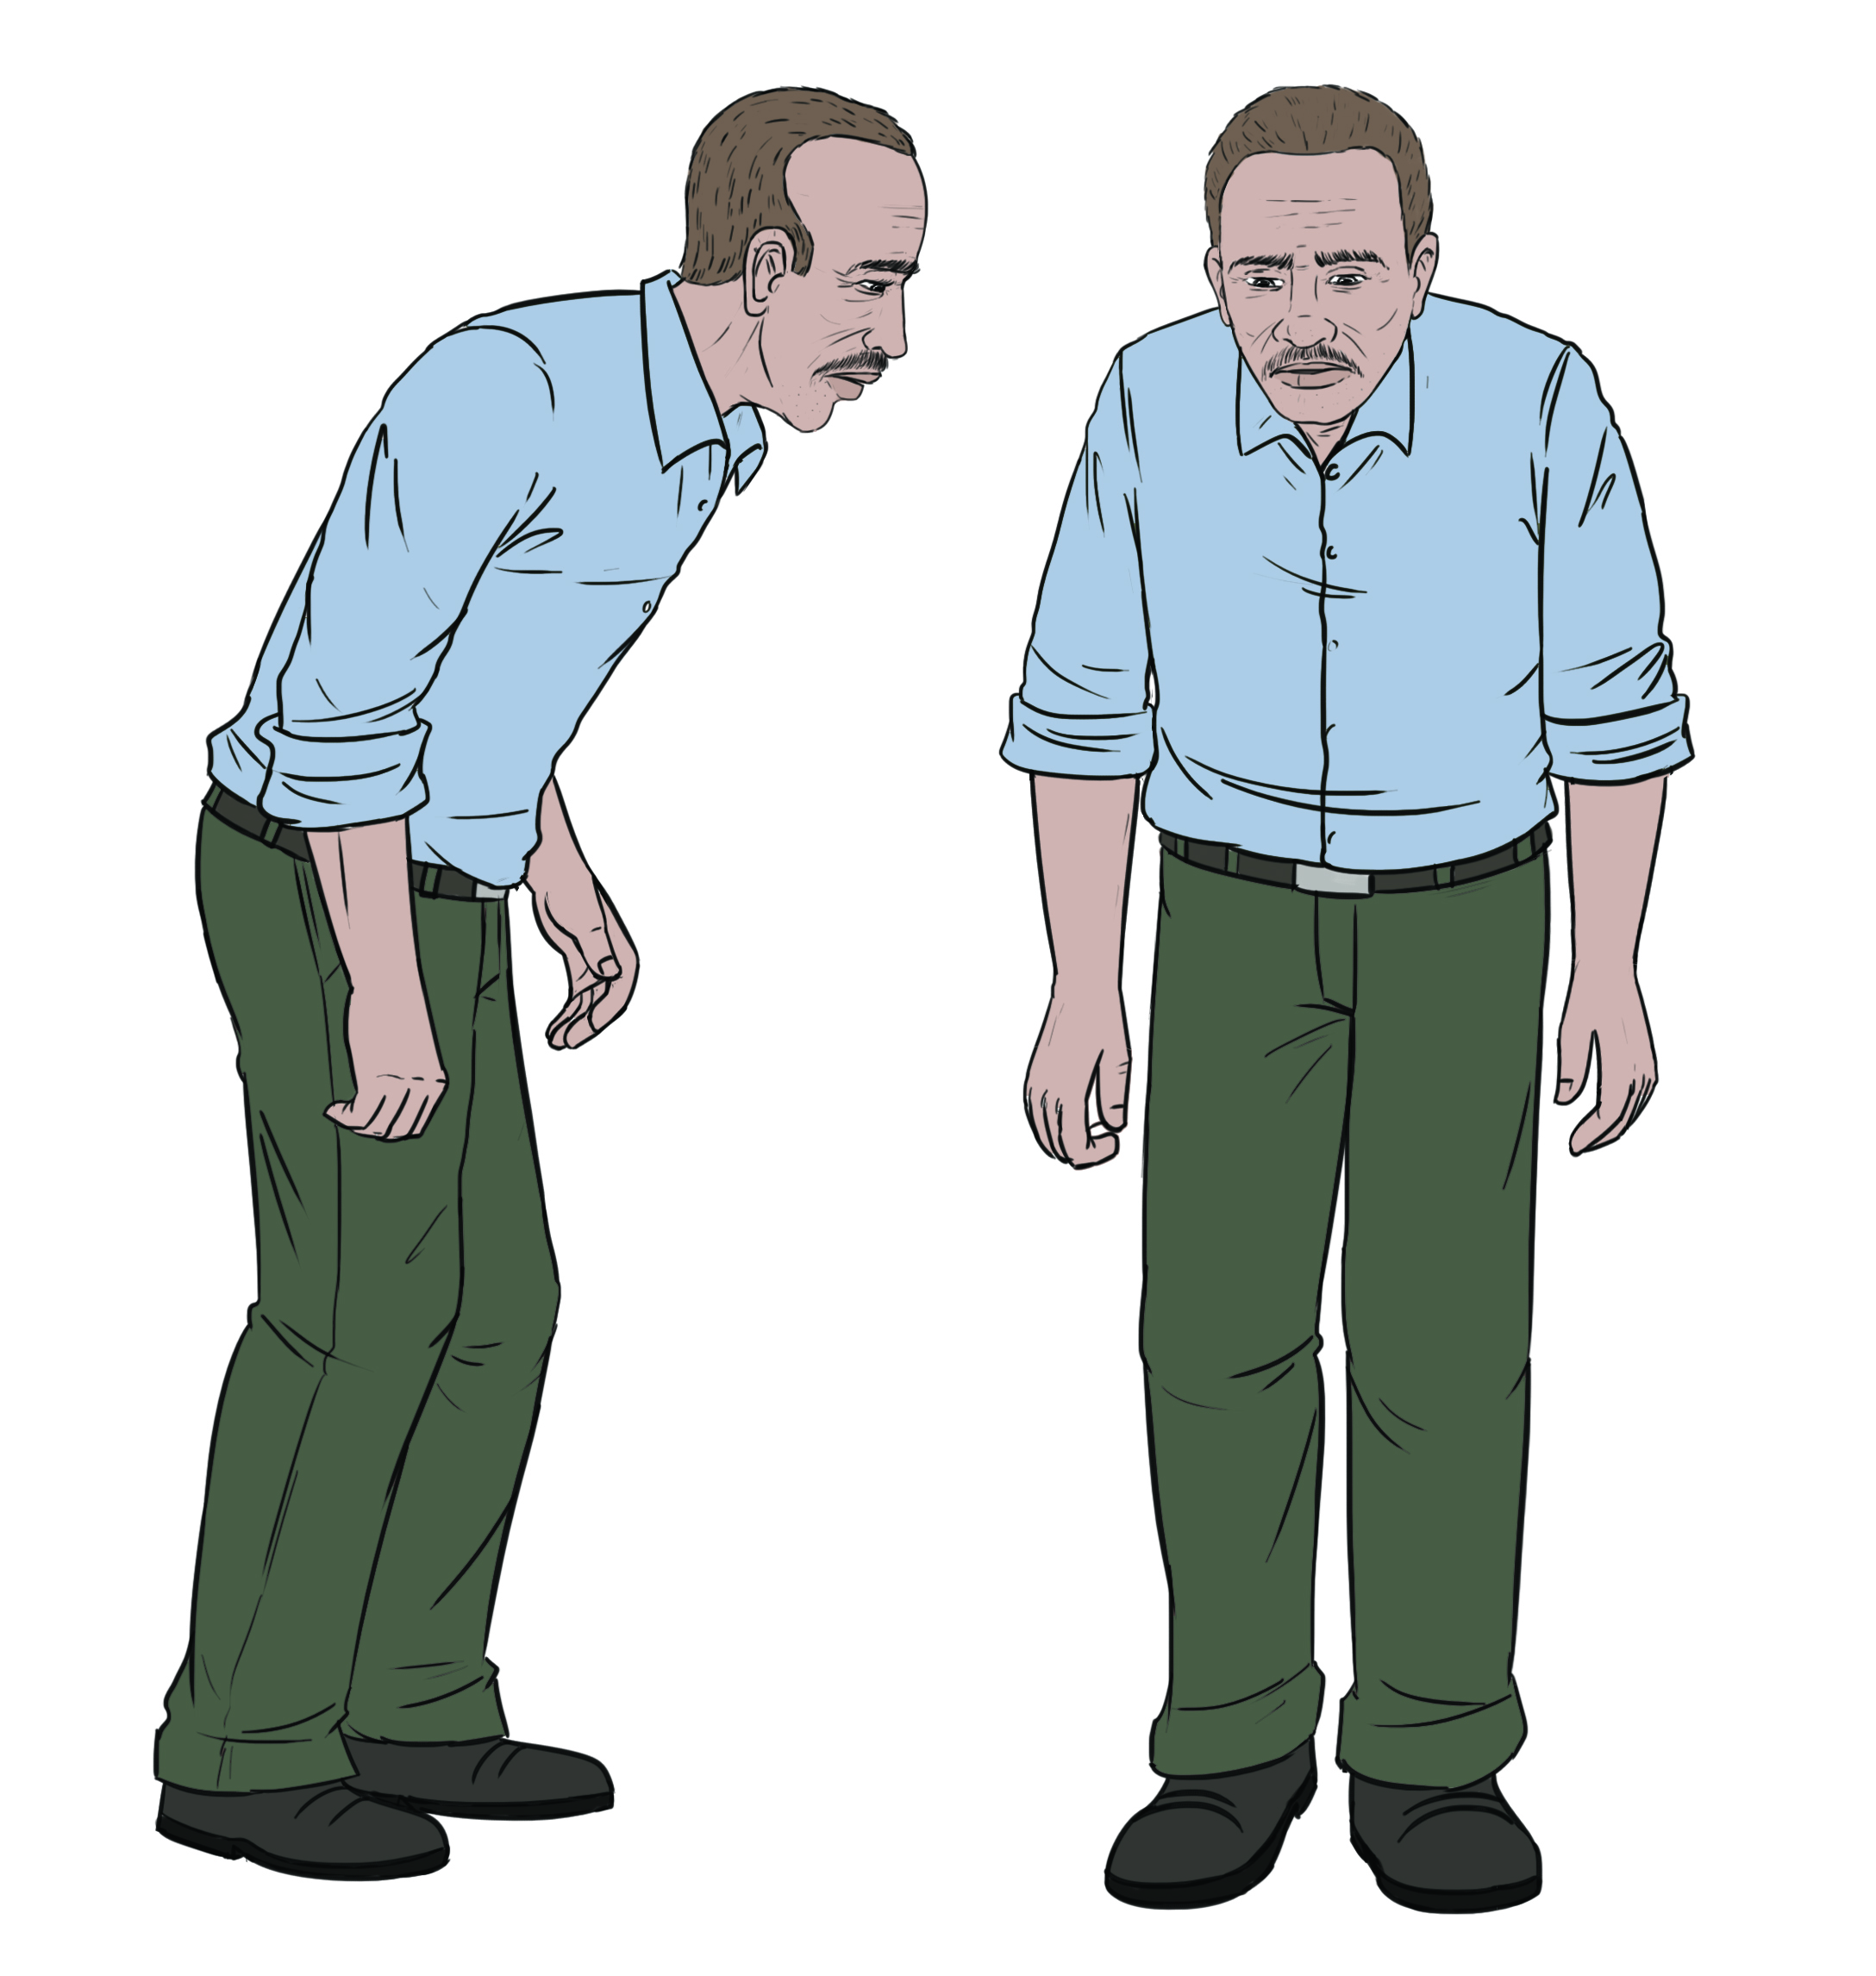 Illustration shows a hunched man with stiff arms and a shuffling walk.